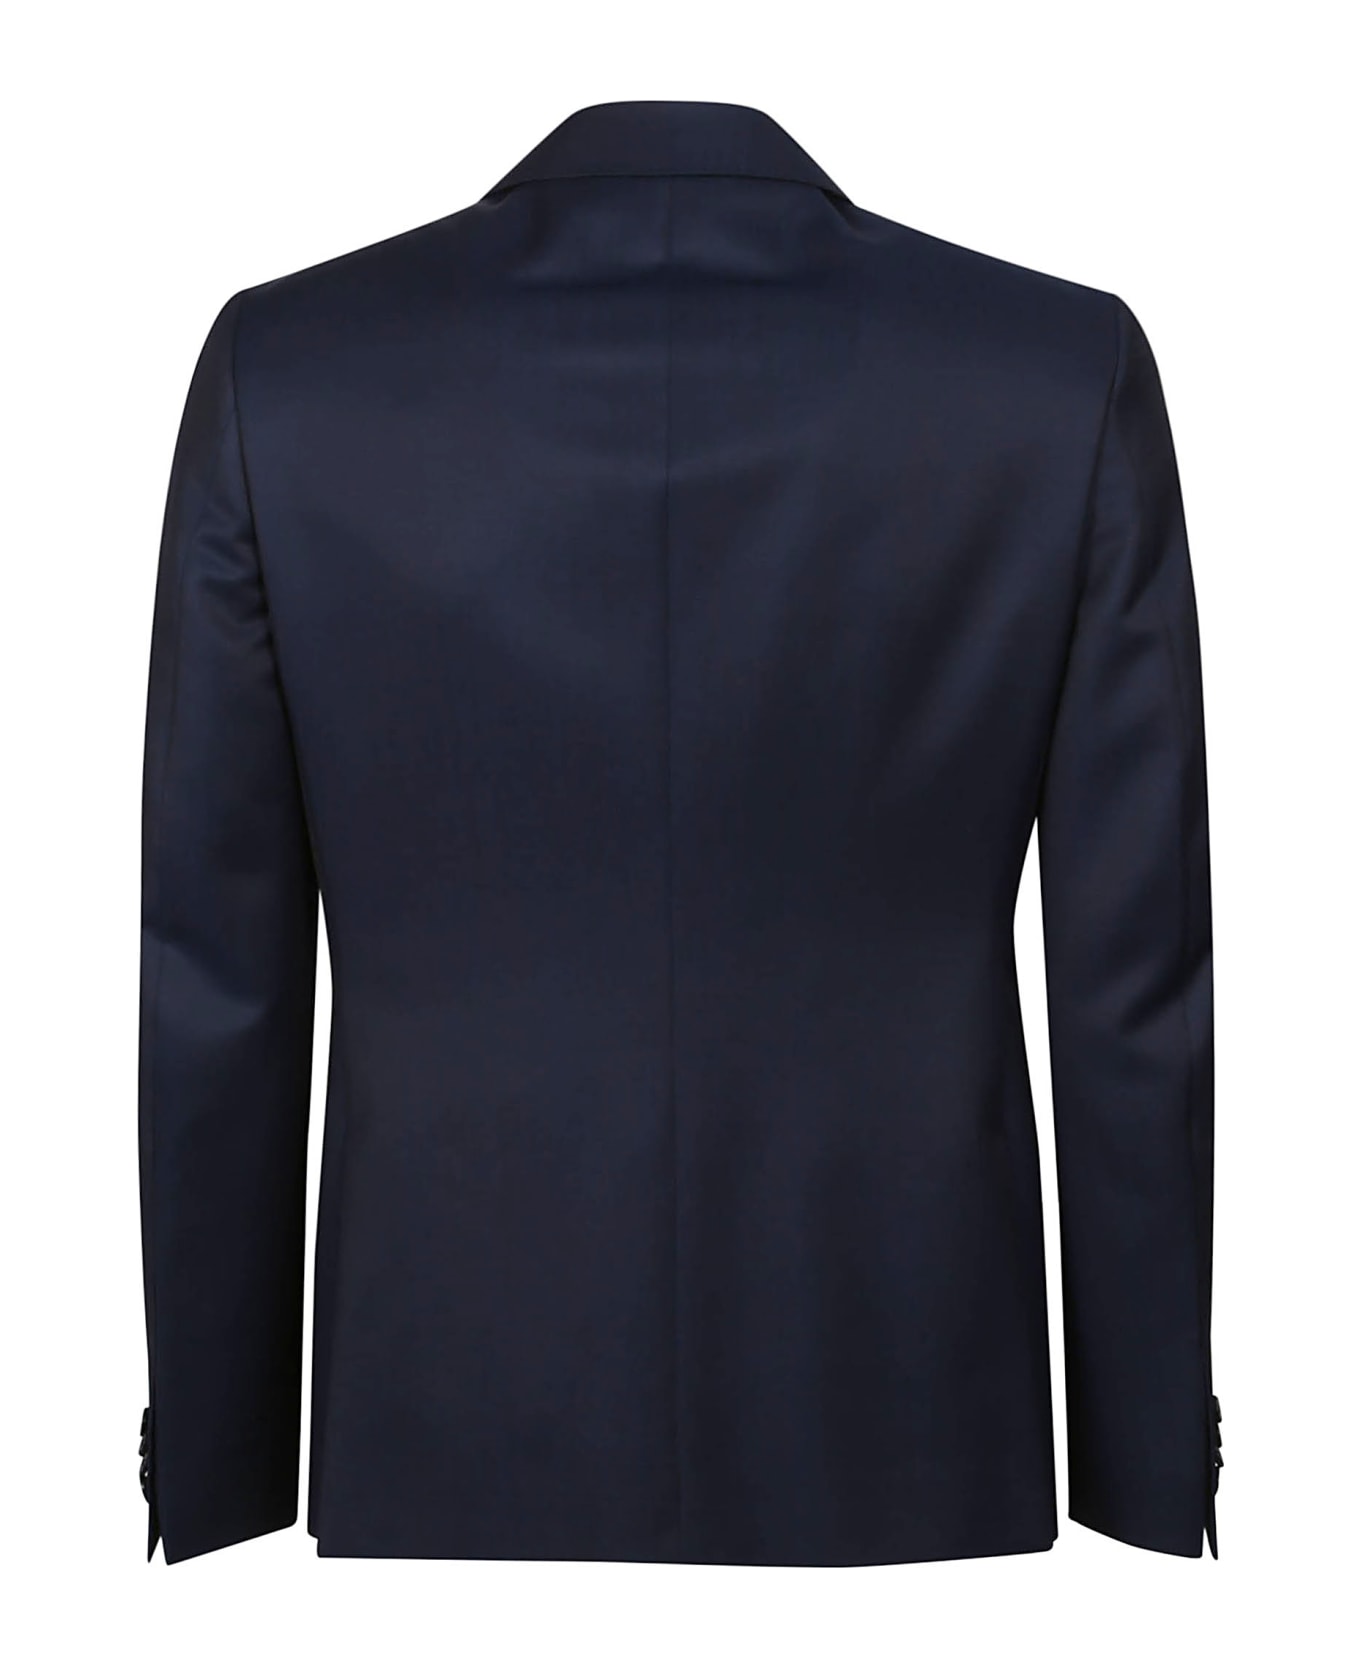 Zegna Lux Tailoring Suit - NAVY